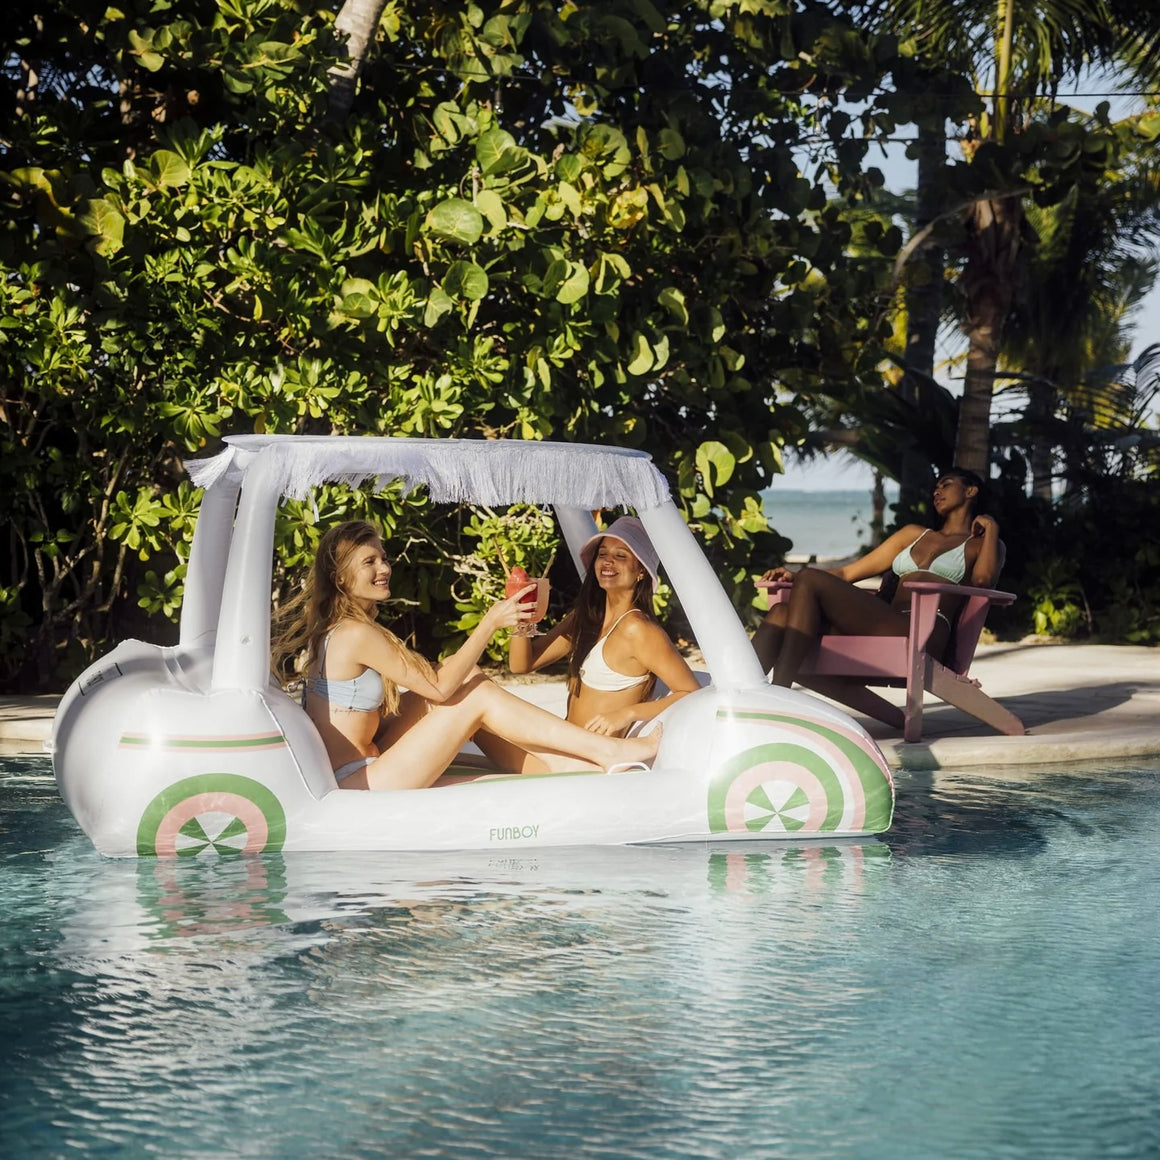 LUXE RIDE-ON FLOAT - FUNBOY GOLF CART